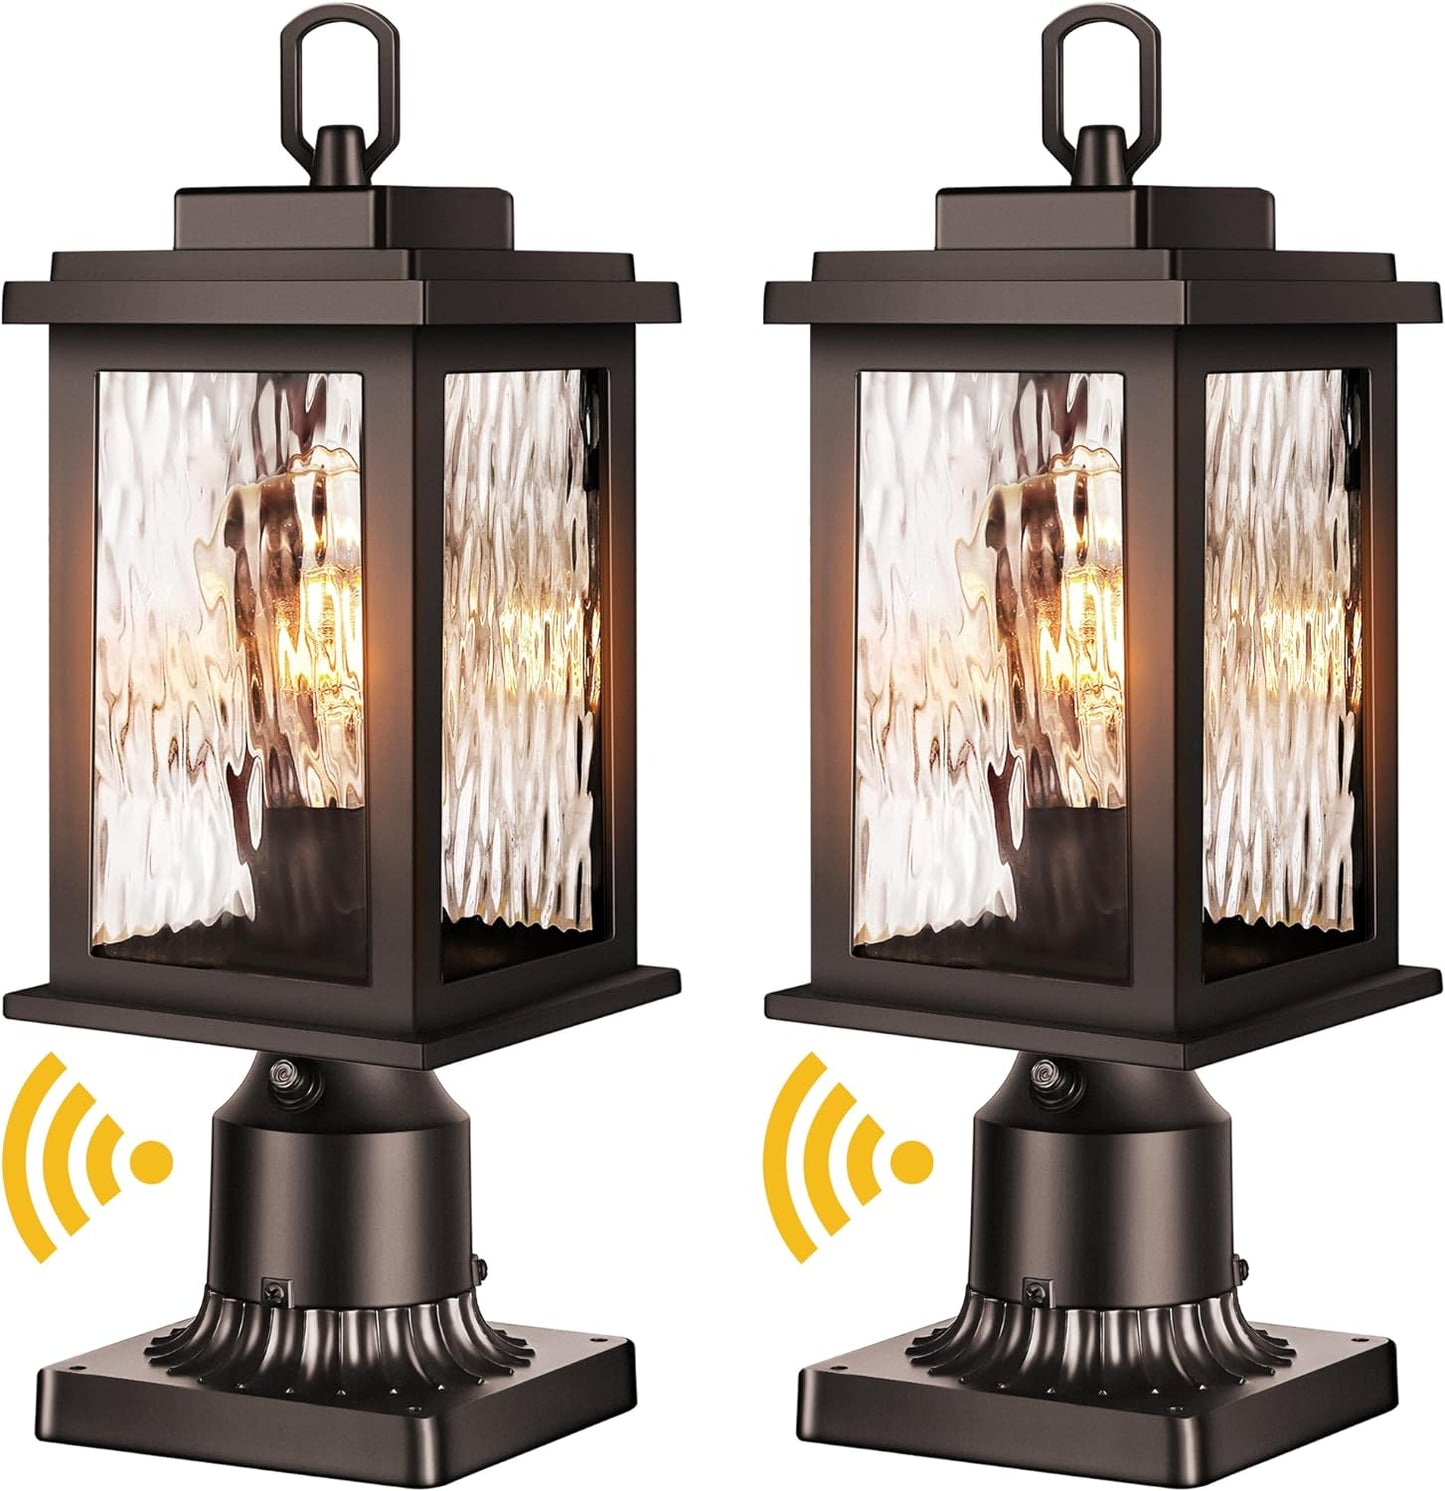 VIANIS Oil Rubbed Bronze Outdoor Post Lights 2 Pack, Dusk to Dawn Light Posts for Outside with Pier Mount Base, 100% Aluminum Body with Tempered Ripple Glass, ORB Column Mount Light (Bronze)